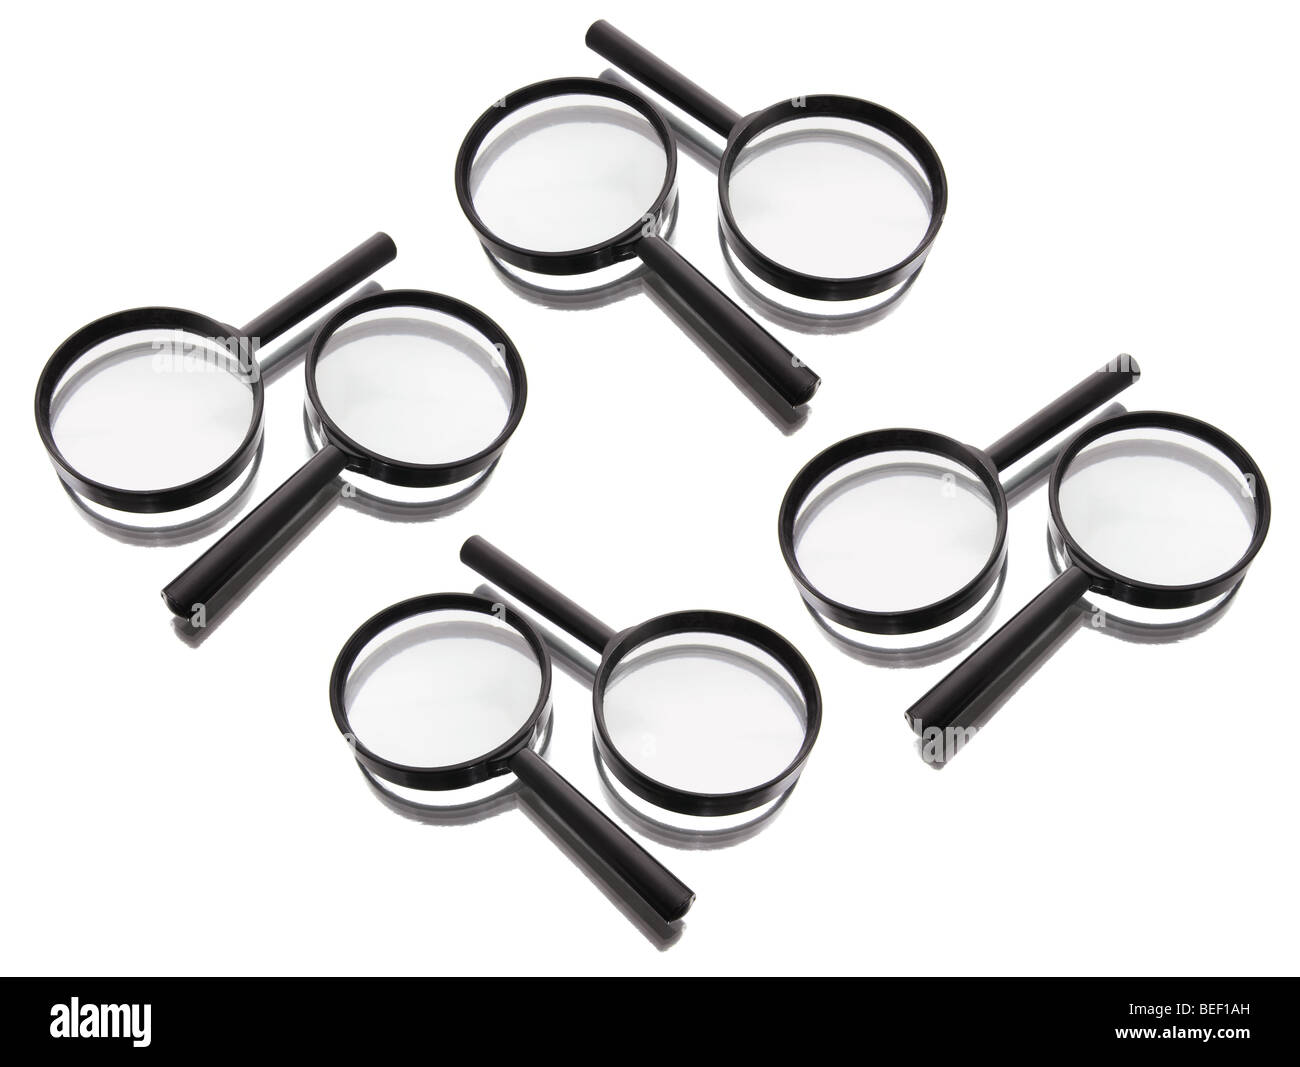 Magnifying Glasses Stock Photo